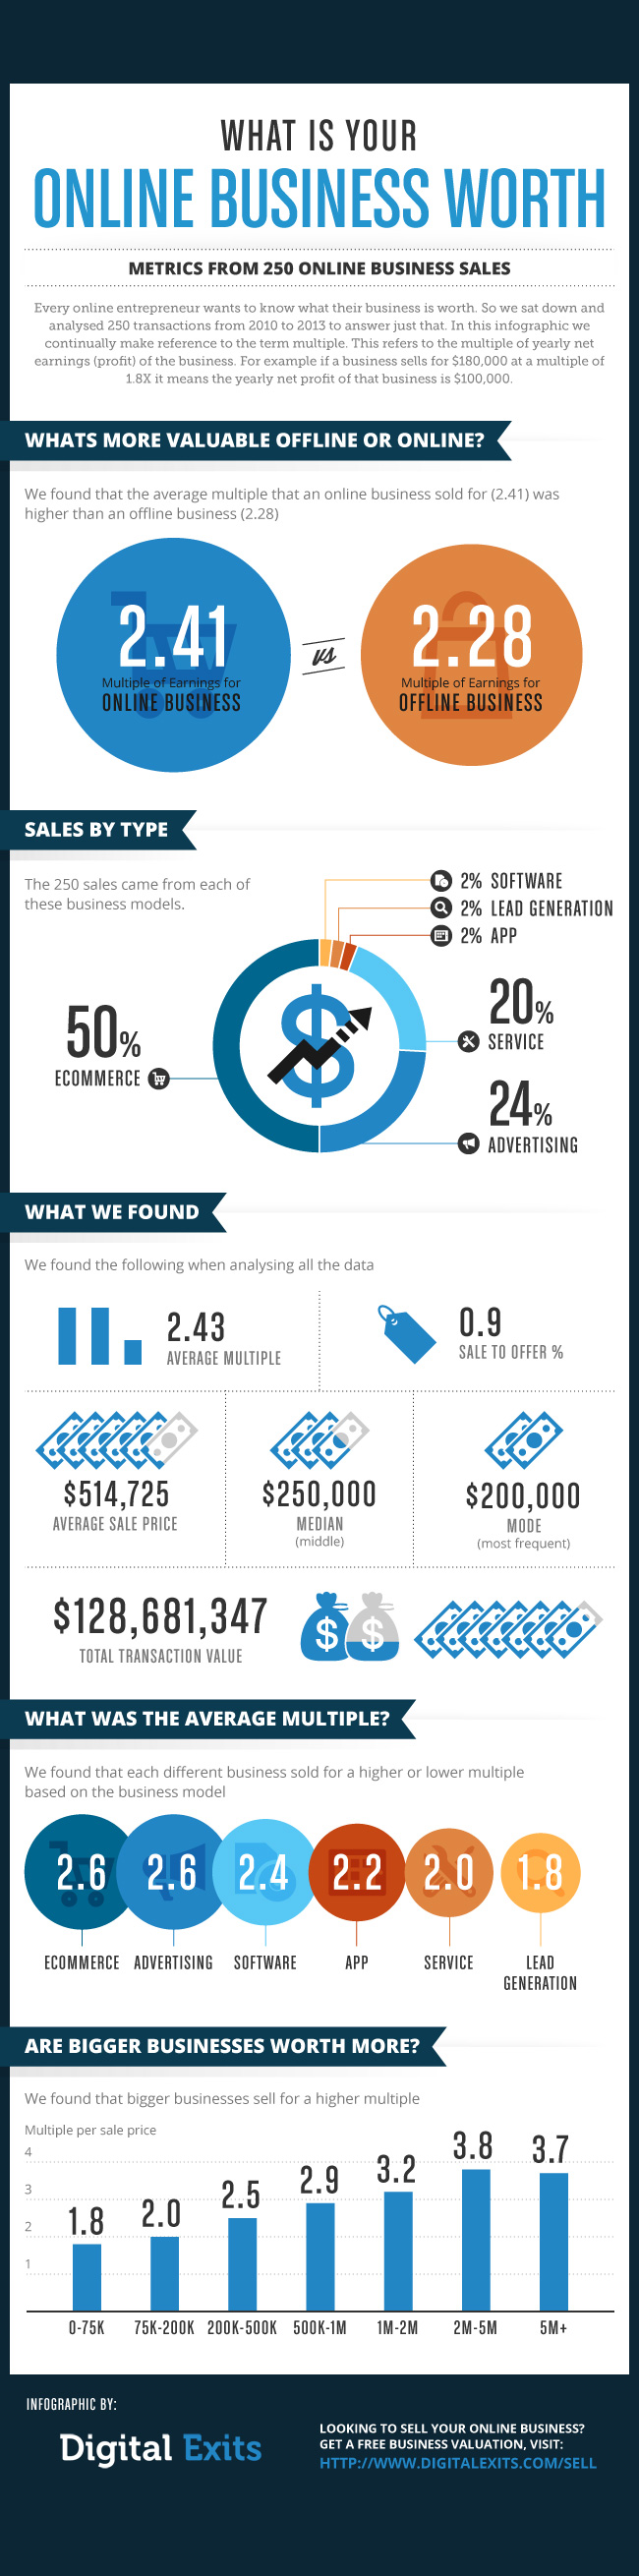 website valuation infographic